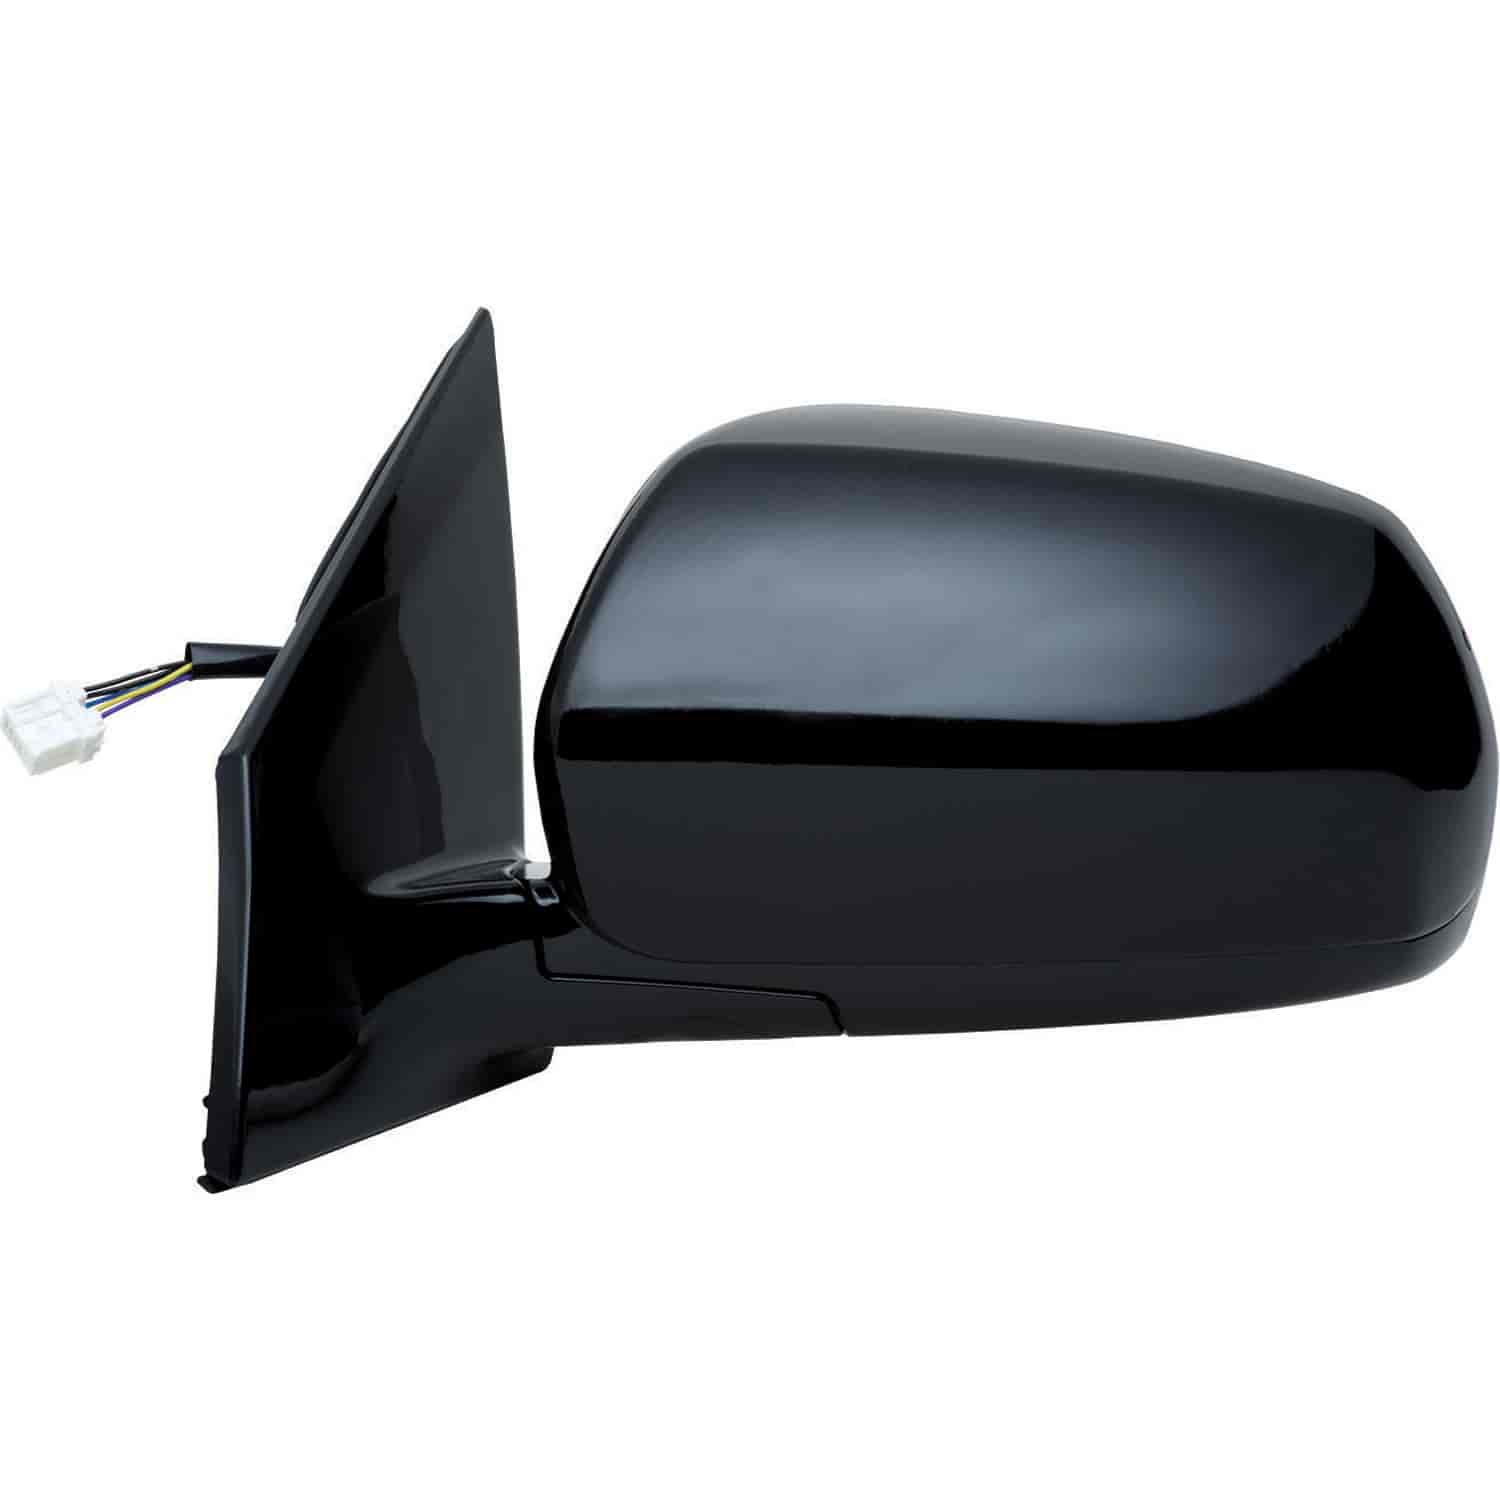 OEM Style Replacement mirror for 05-07 Nissan Murano